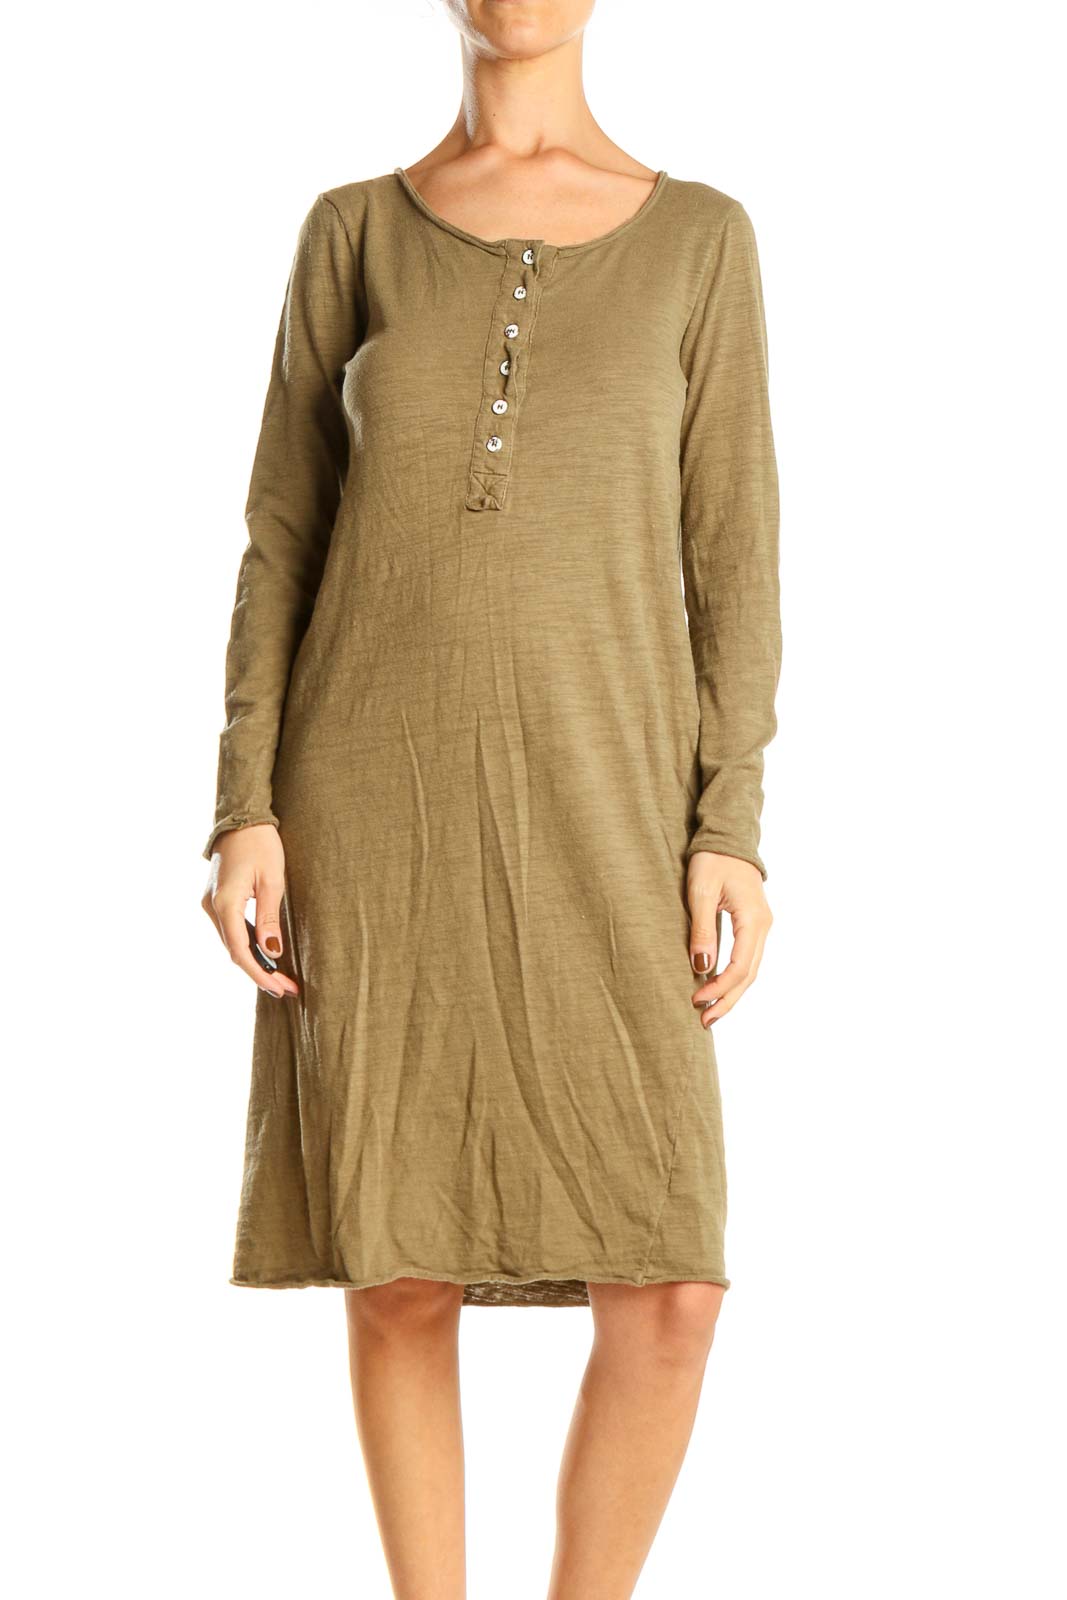 Brown Casual Shirt Dress Front